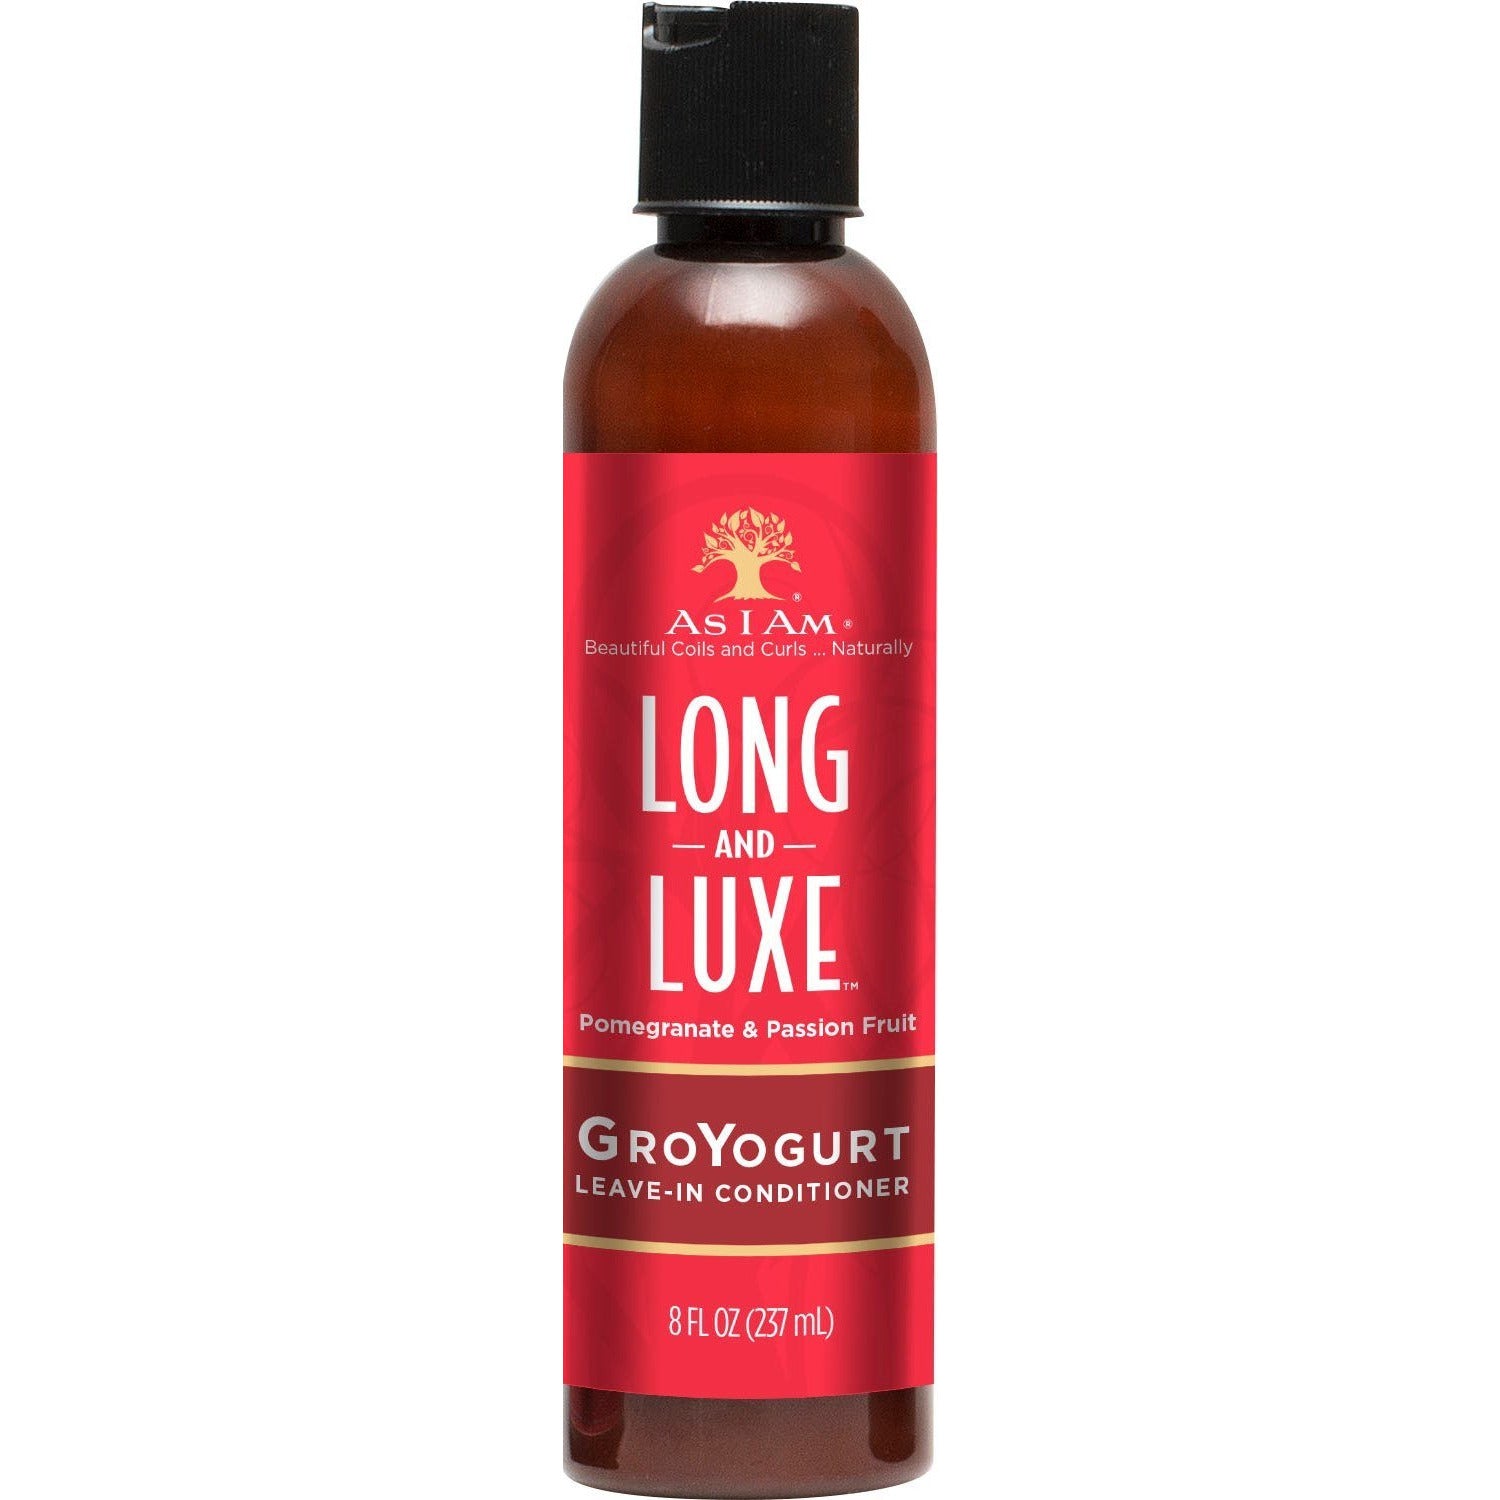 4th Ave Market: As I Am Long and Luxe GroYogurt Leave-In Conditioner, 8 Ounce